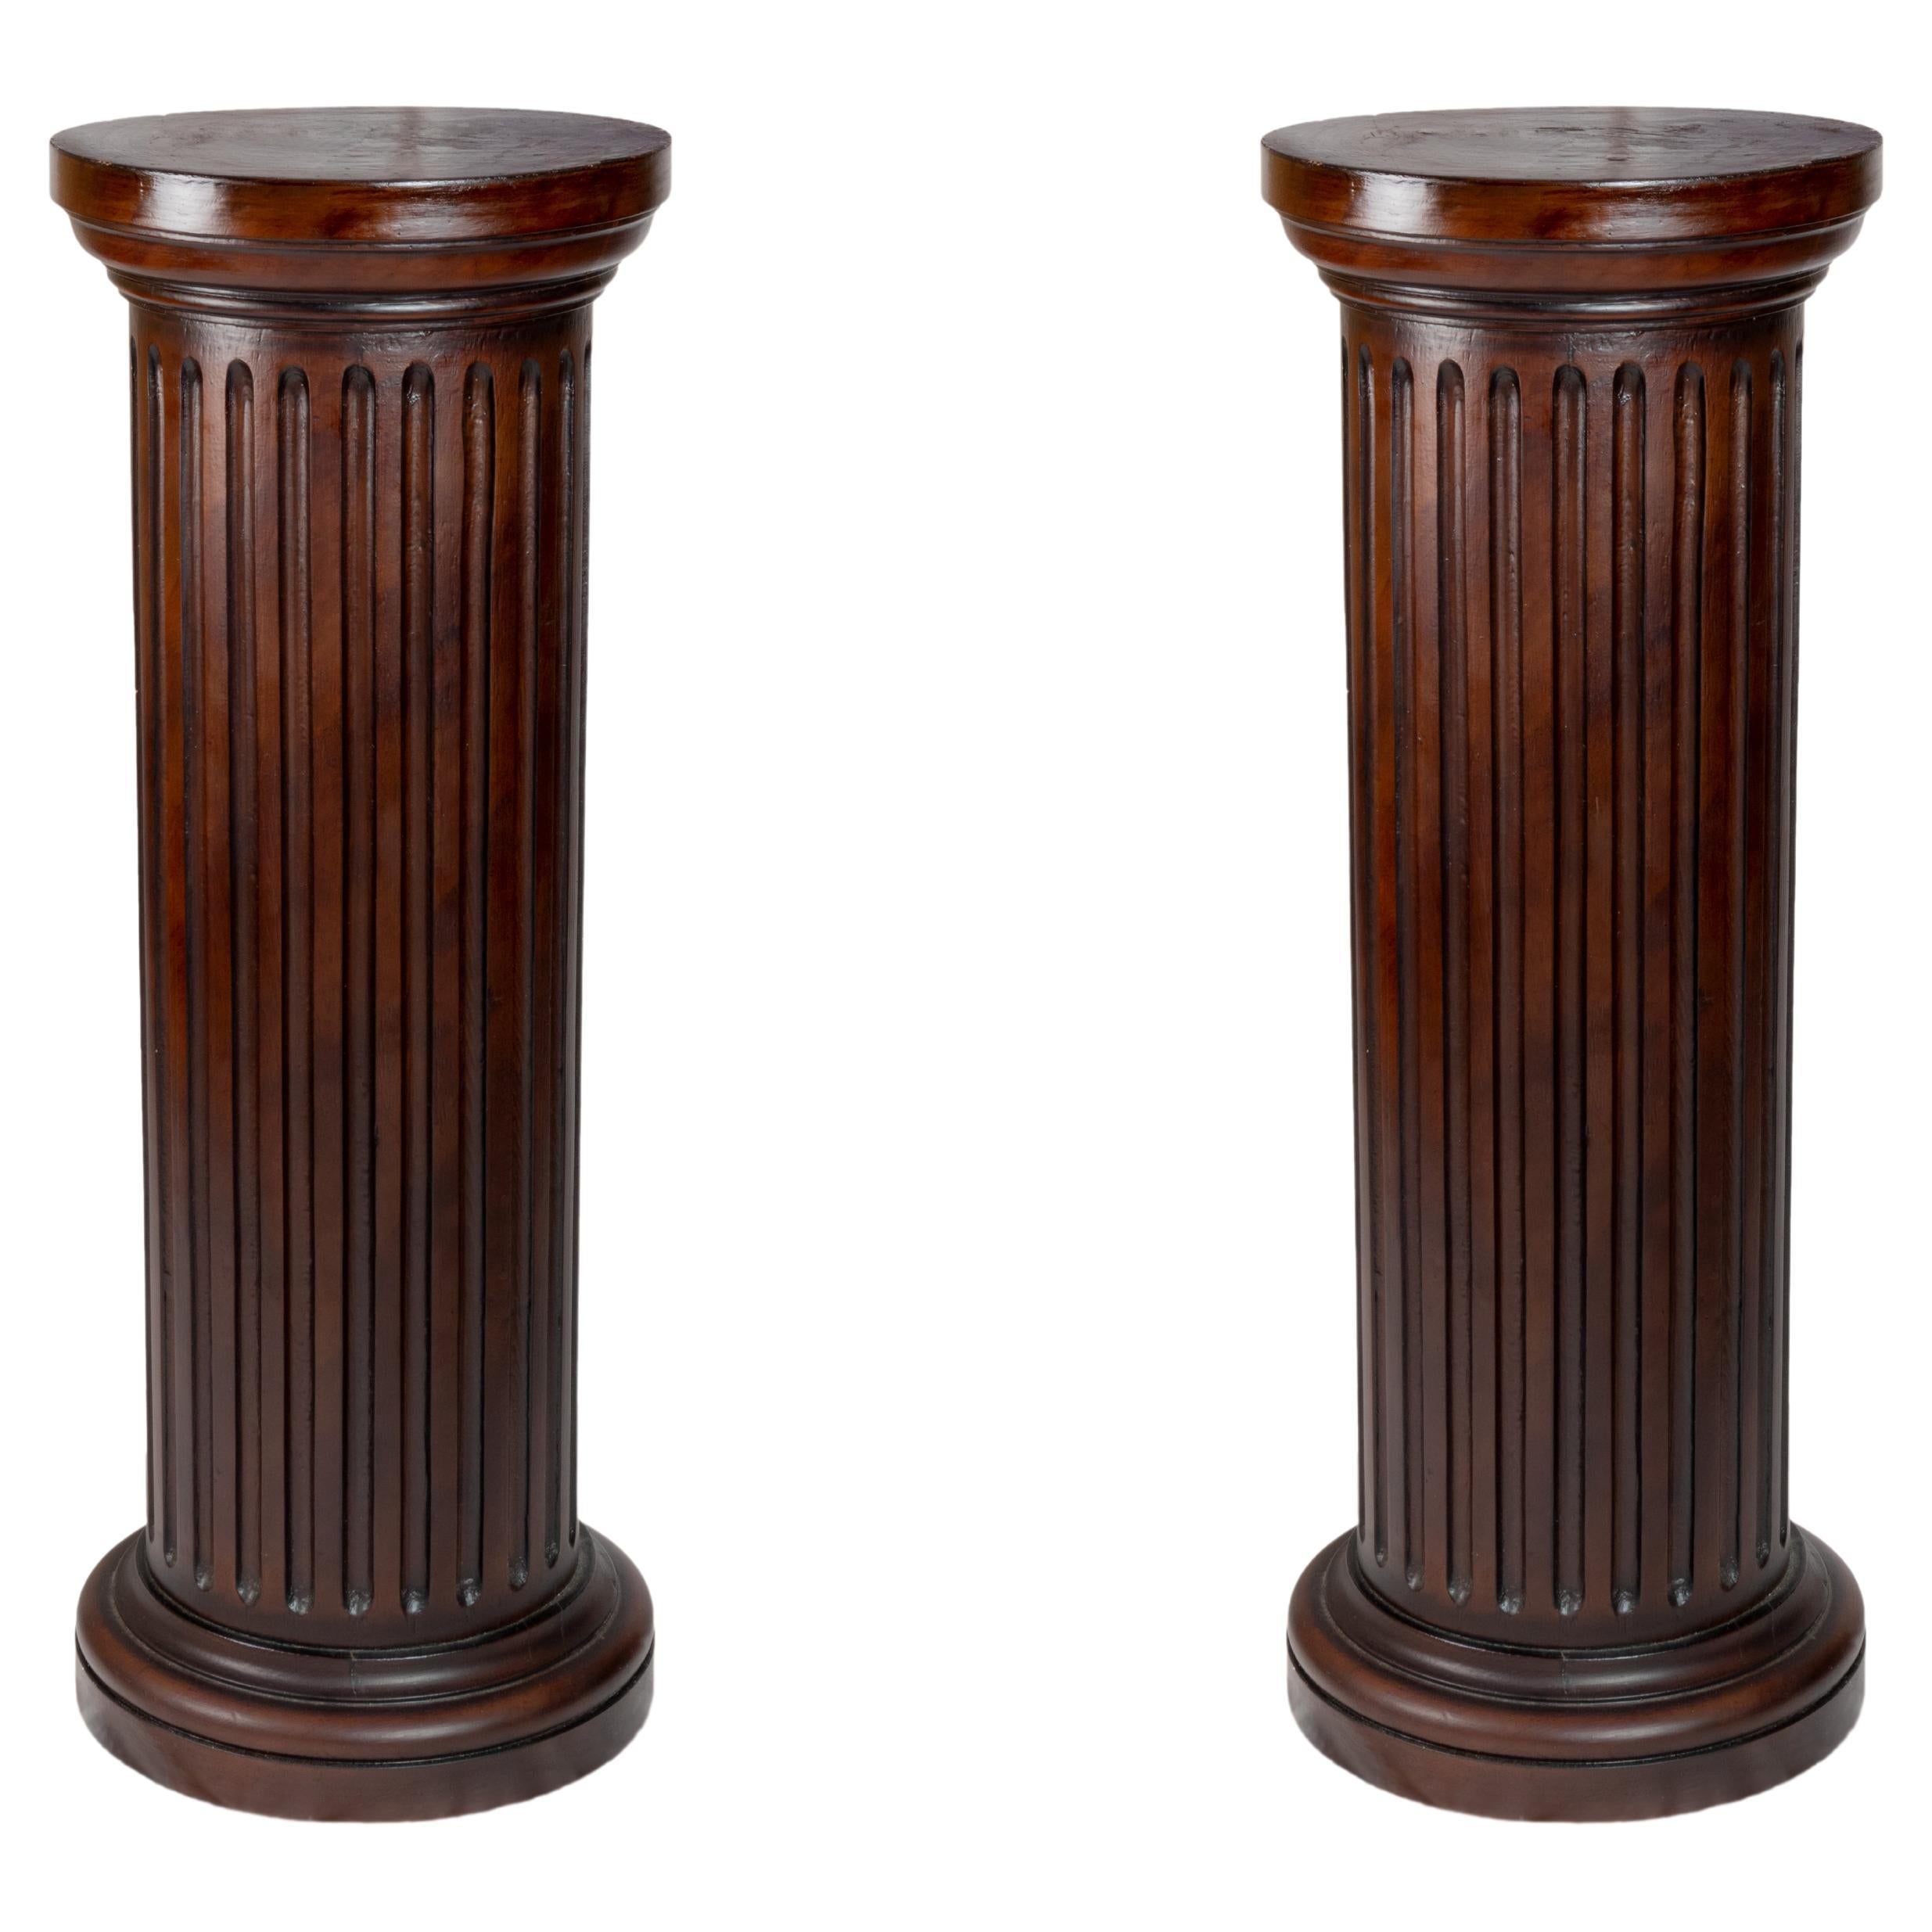  Pair Of French Fluted Wood Columns, 19th Century